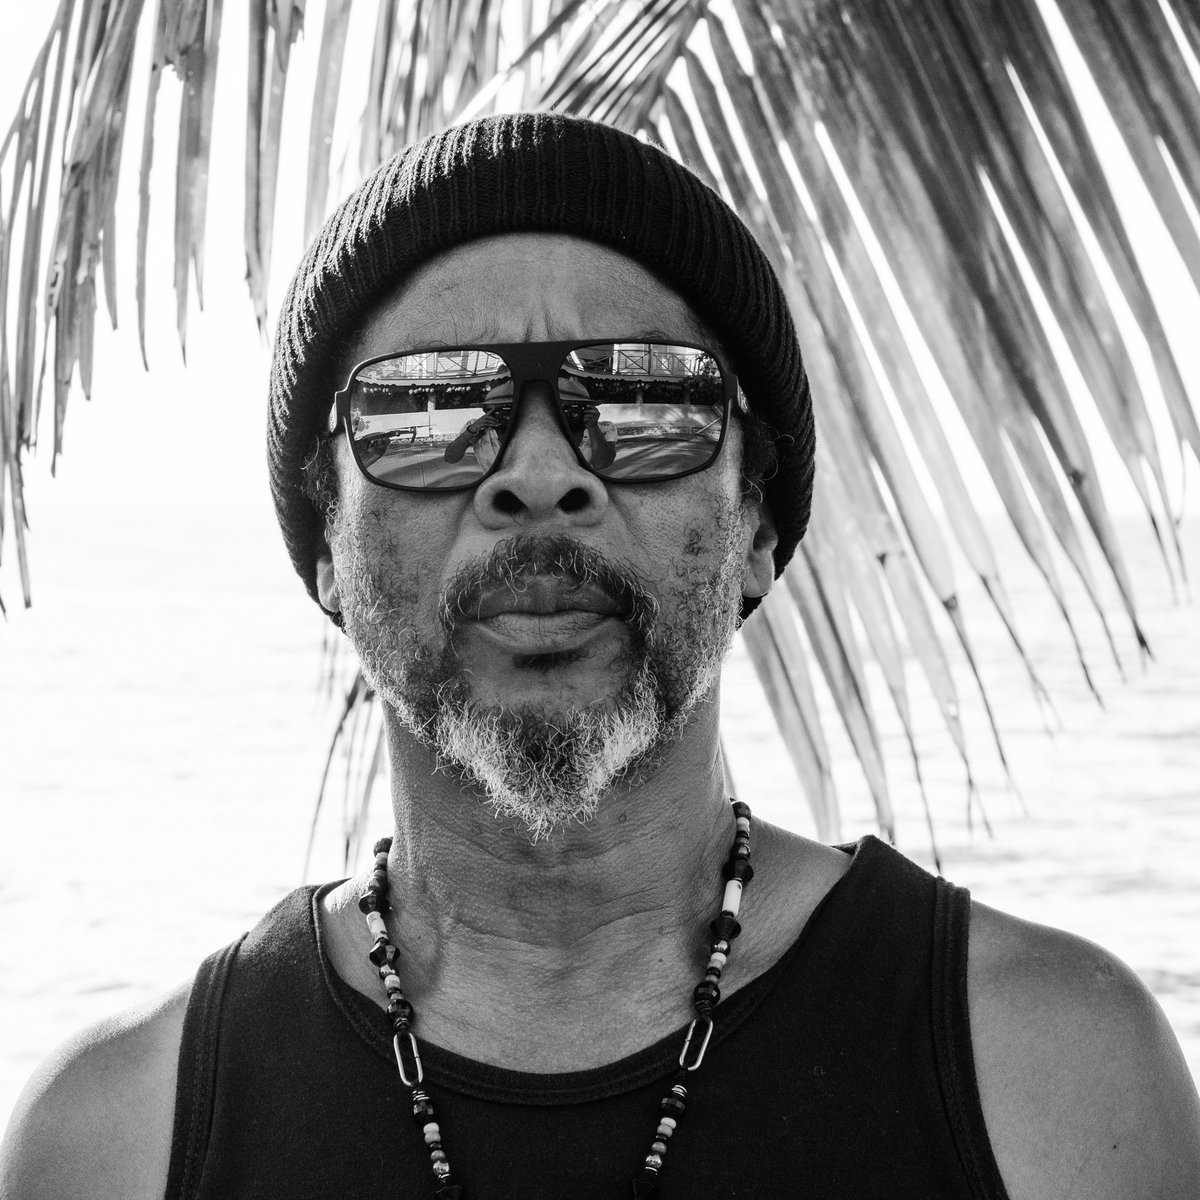 Job Saas, Musician and Leader of a Reggae band The Rebels, Radio Presenter and Farmer in San Andres.